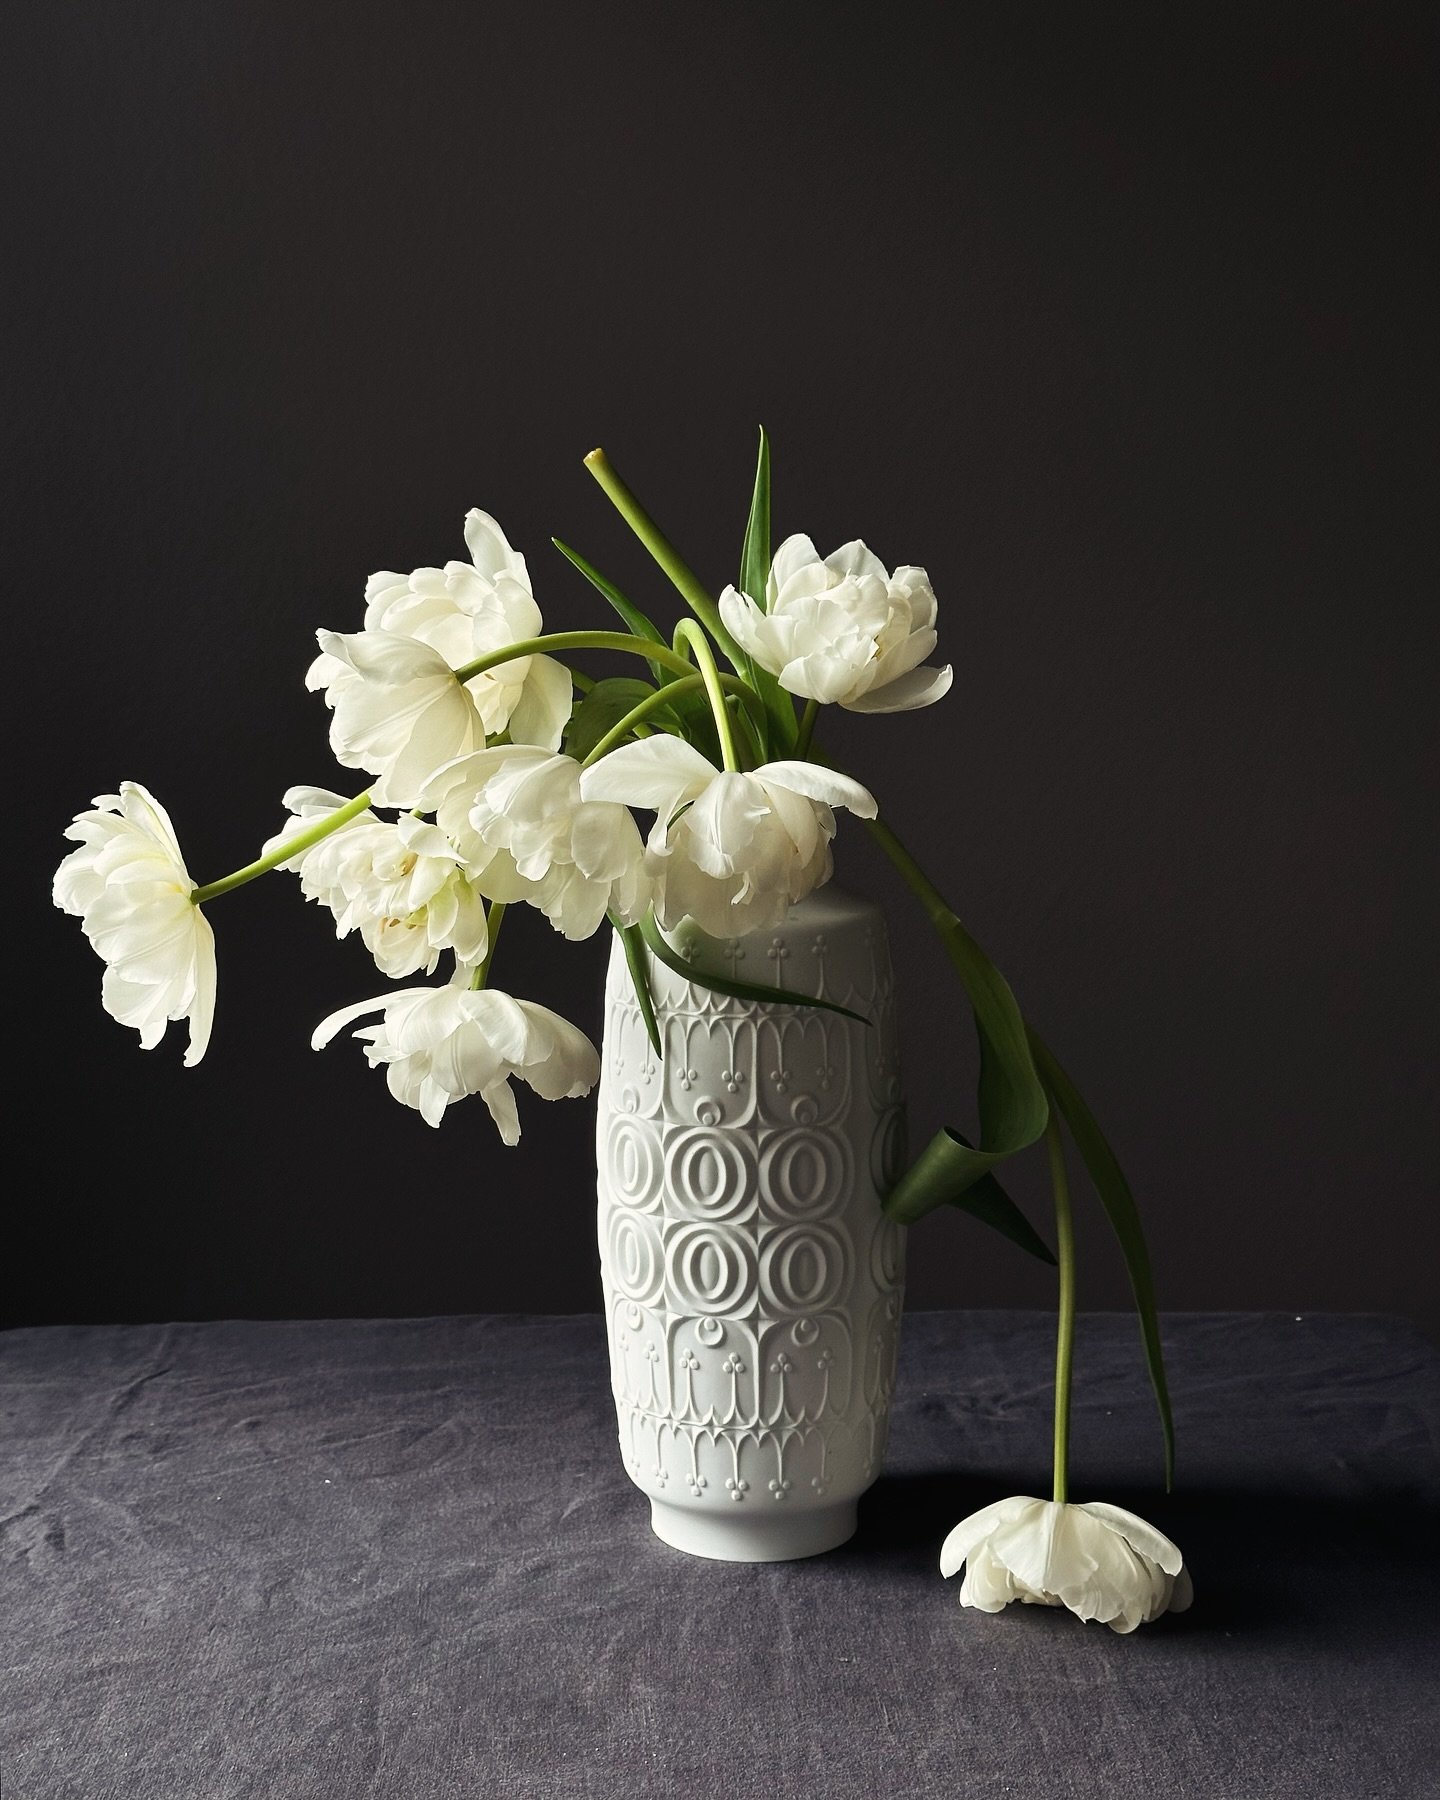 Tulips&hellip;.. .
.
.
.
.
.
#tulips #white #spring #interiors #sustainablefloristry #collectandstyle